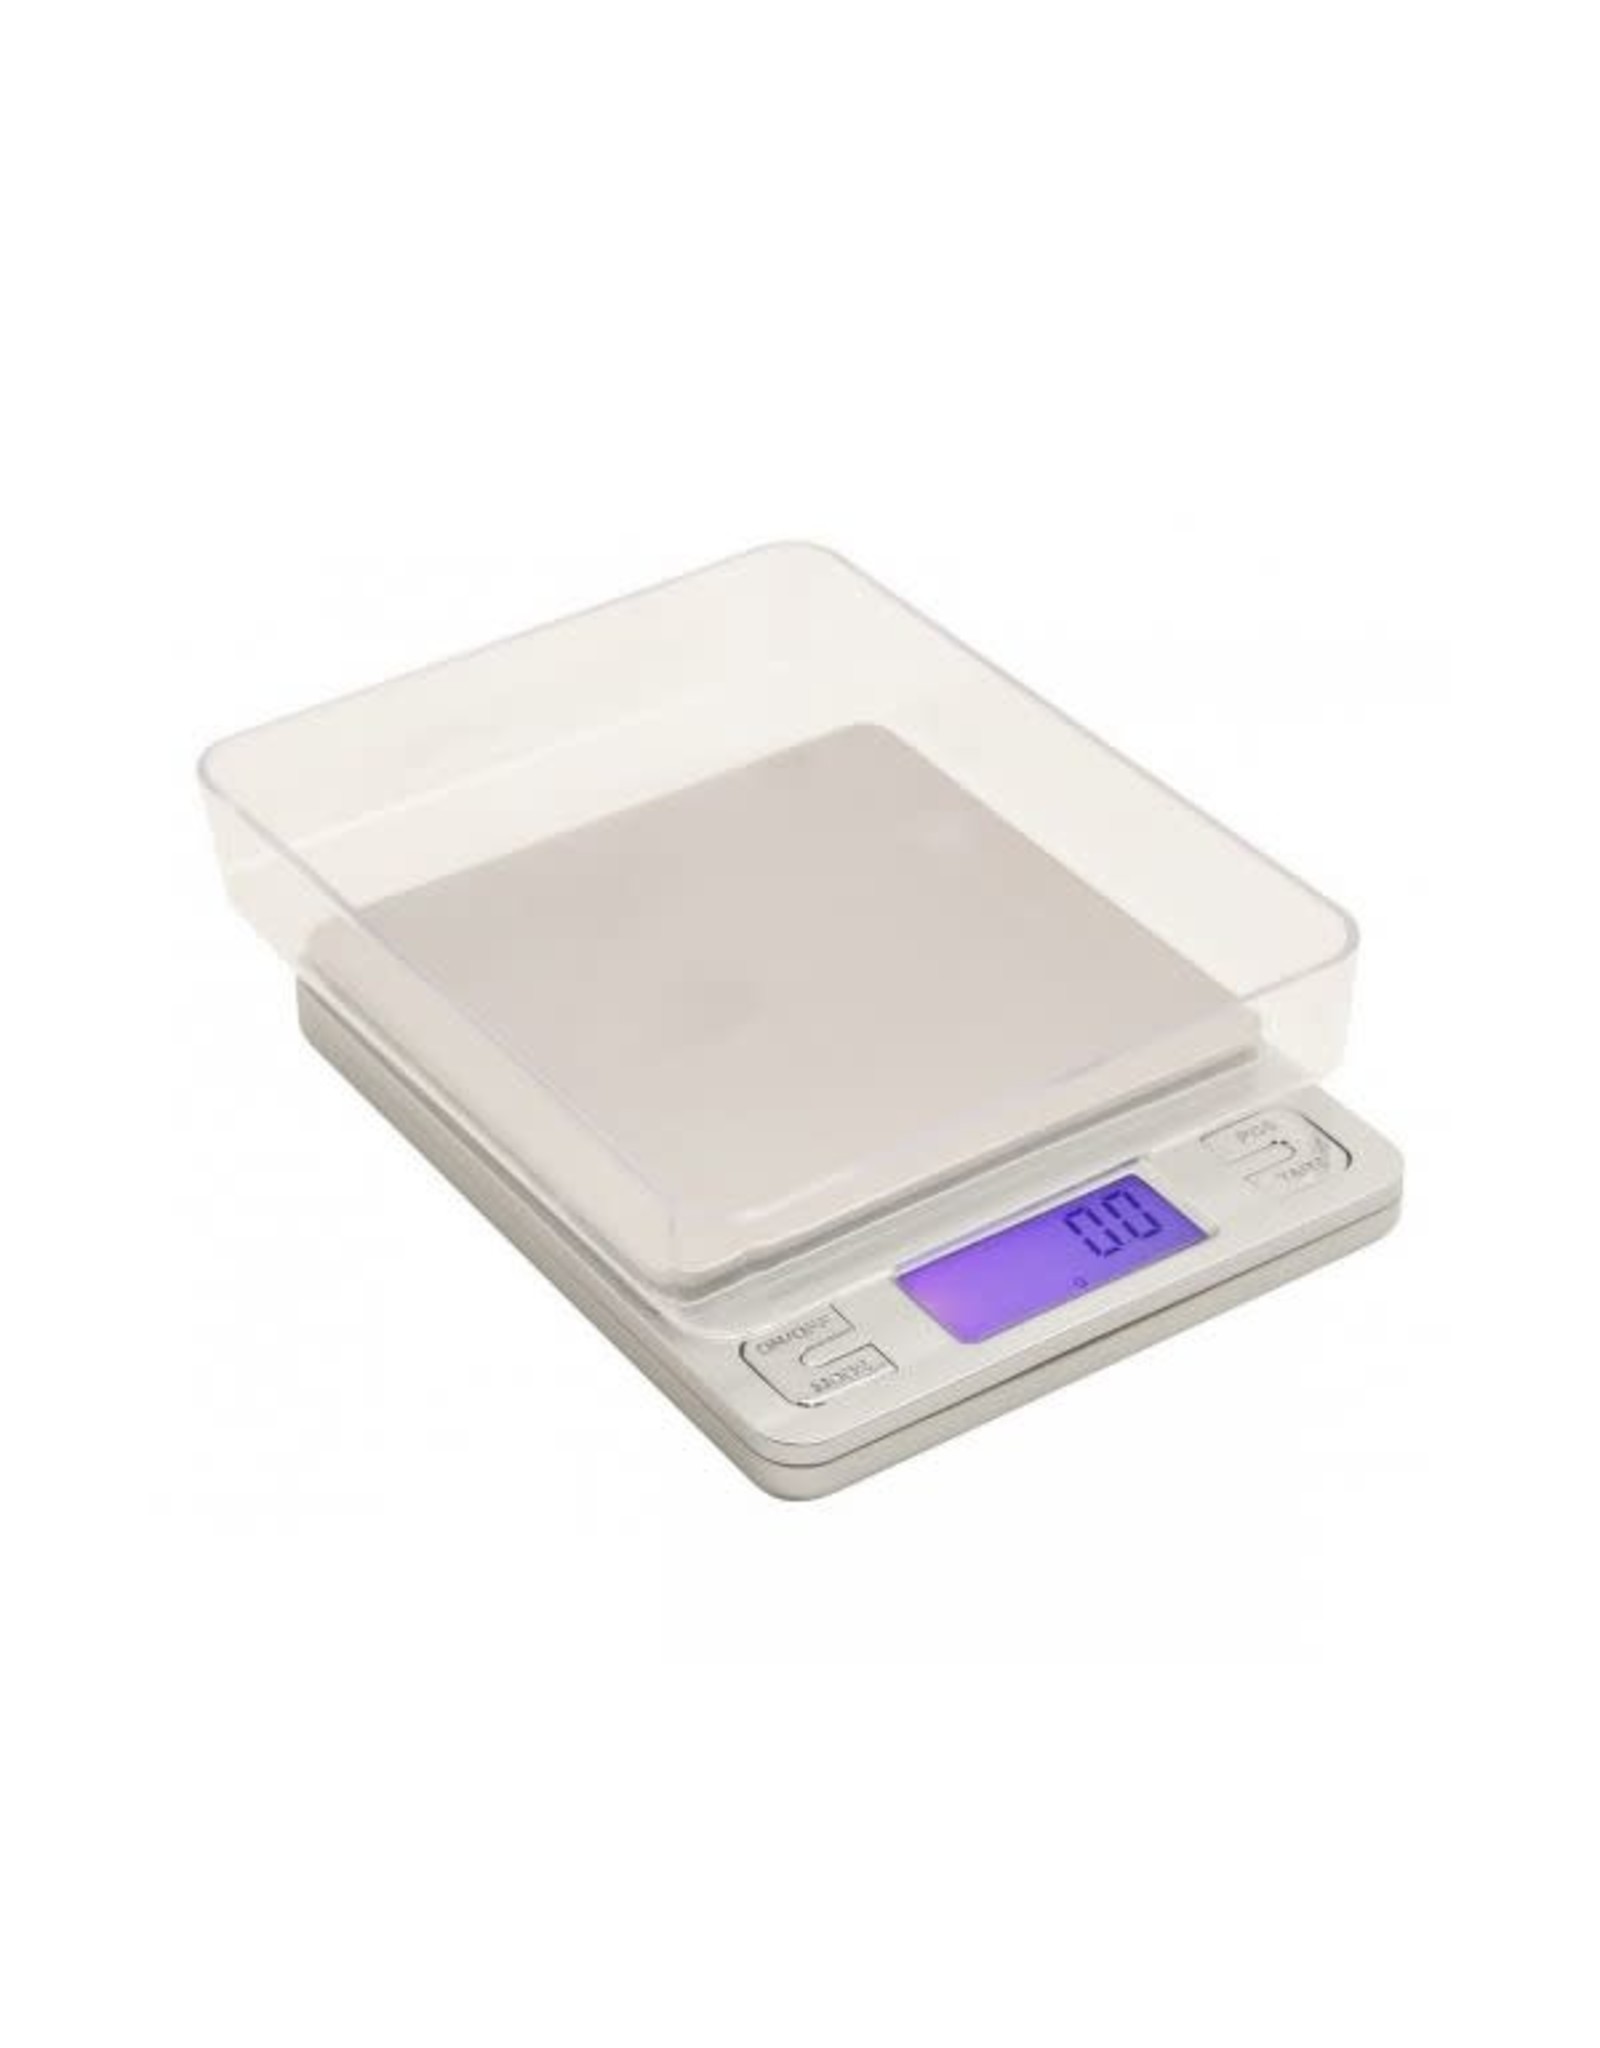 Measure Master Measure Master 3000g Digital Table Top Scale w/ Tray 3000g Capacity x 0.1g Accuracy